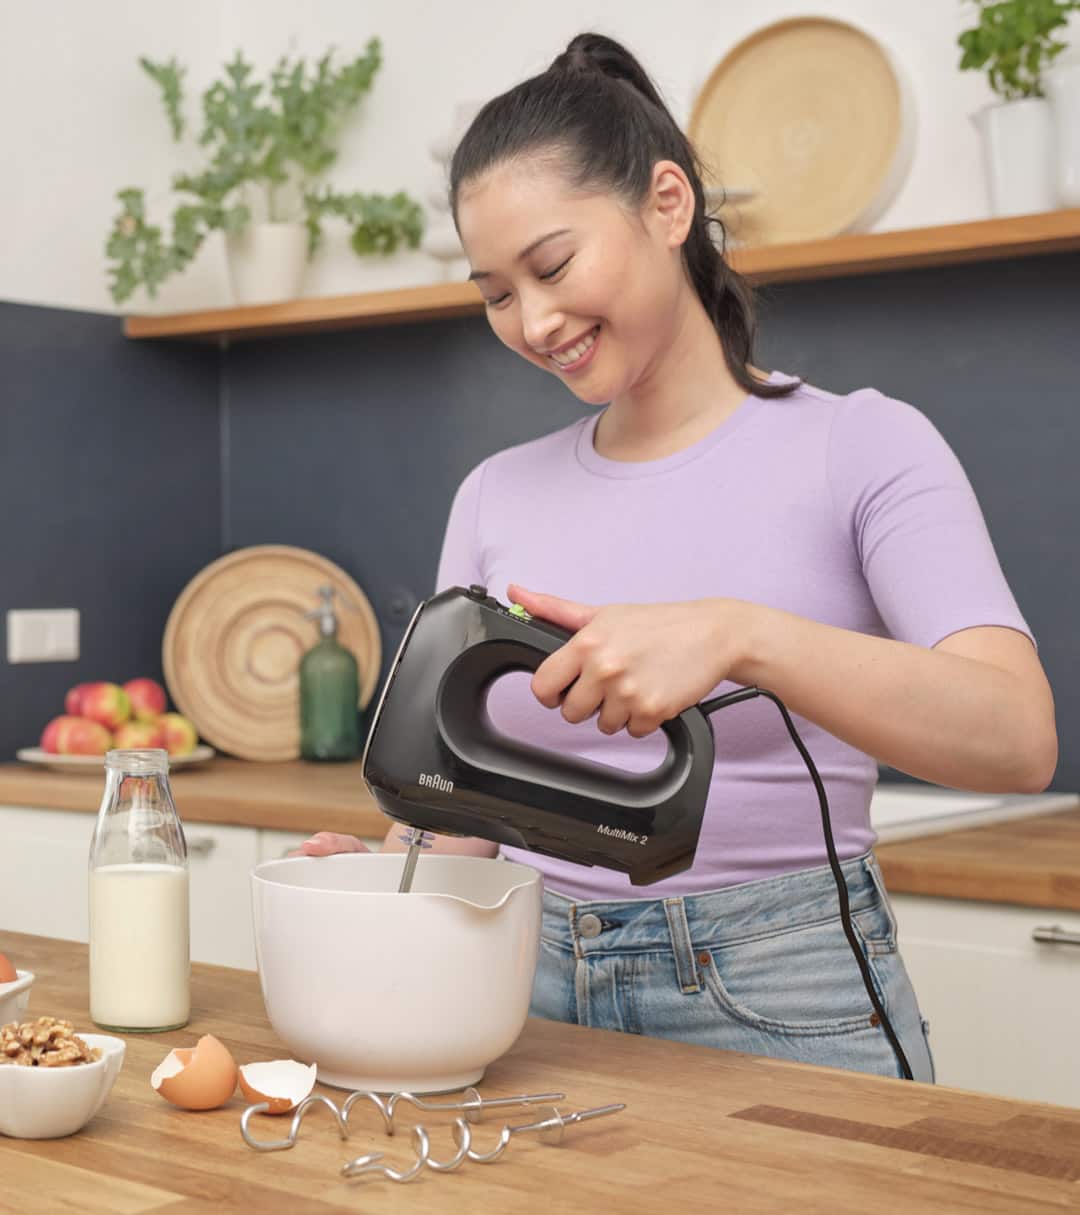 Woman using a black MultiMix 2 hand mixer that has 4 speeds and an additional turbo mode